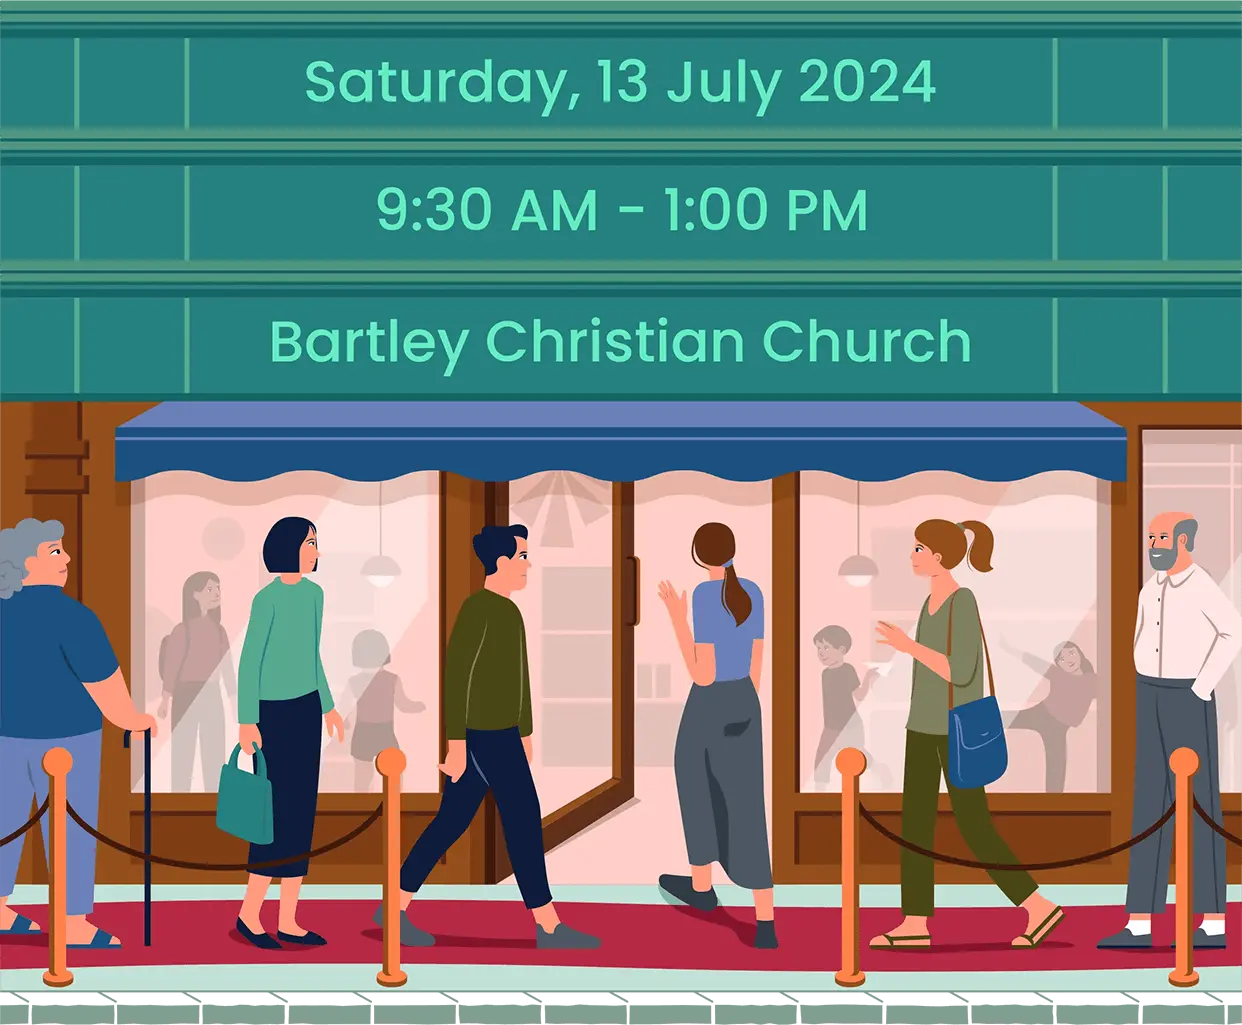 The Dauting Privilege. Reaching Children with The Good News of Christ. Saturday, 13 July 2024, 9:30 AM - 1:00 PM at Bartley Christian Church